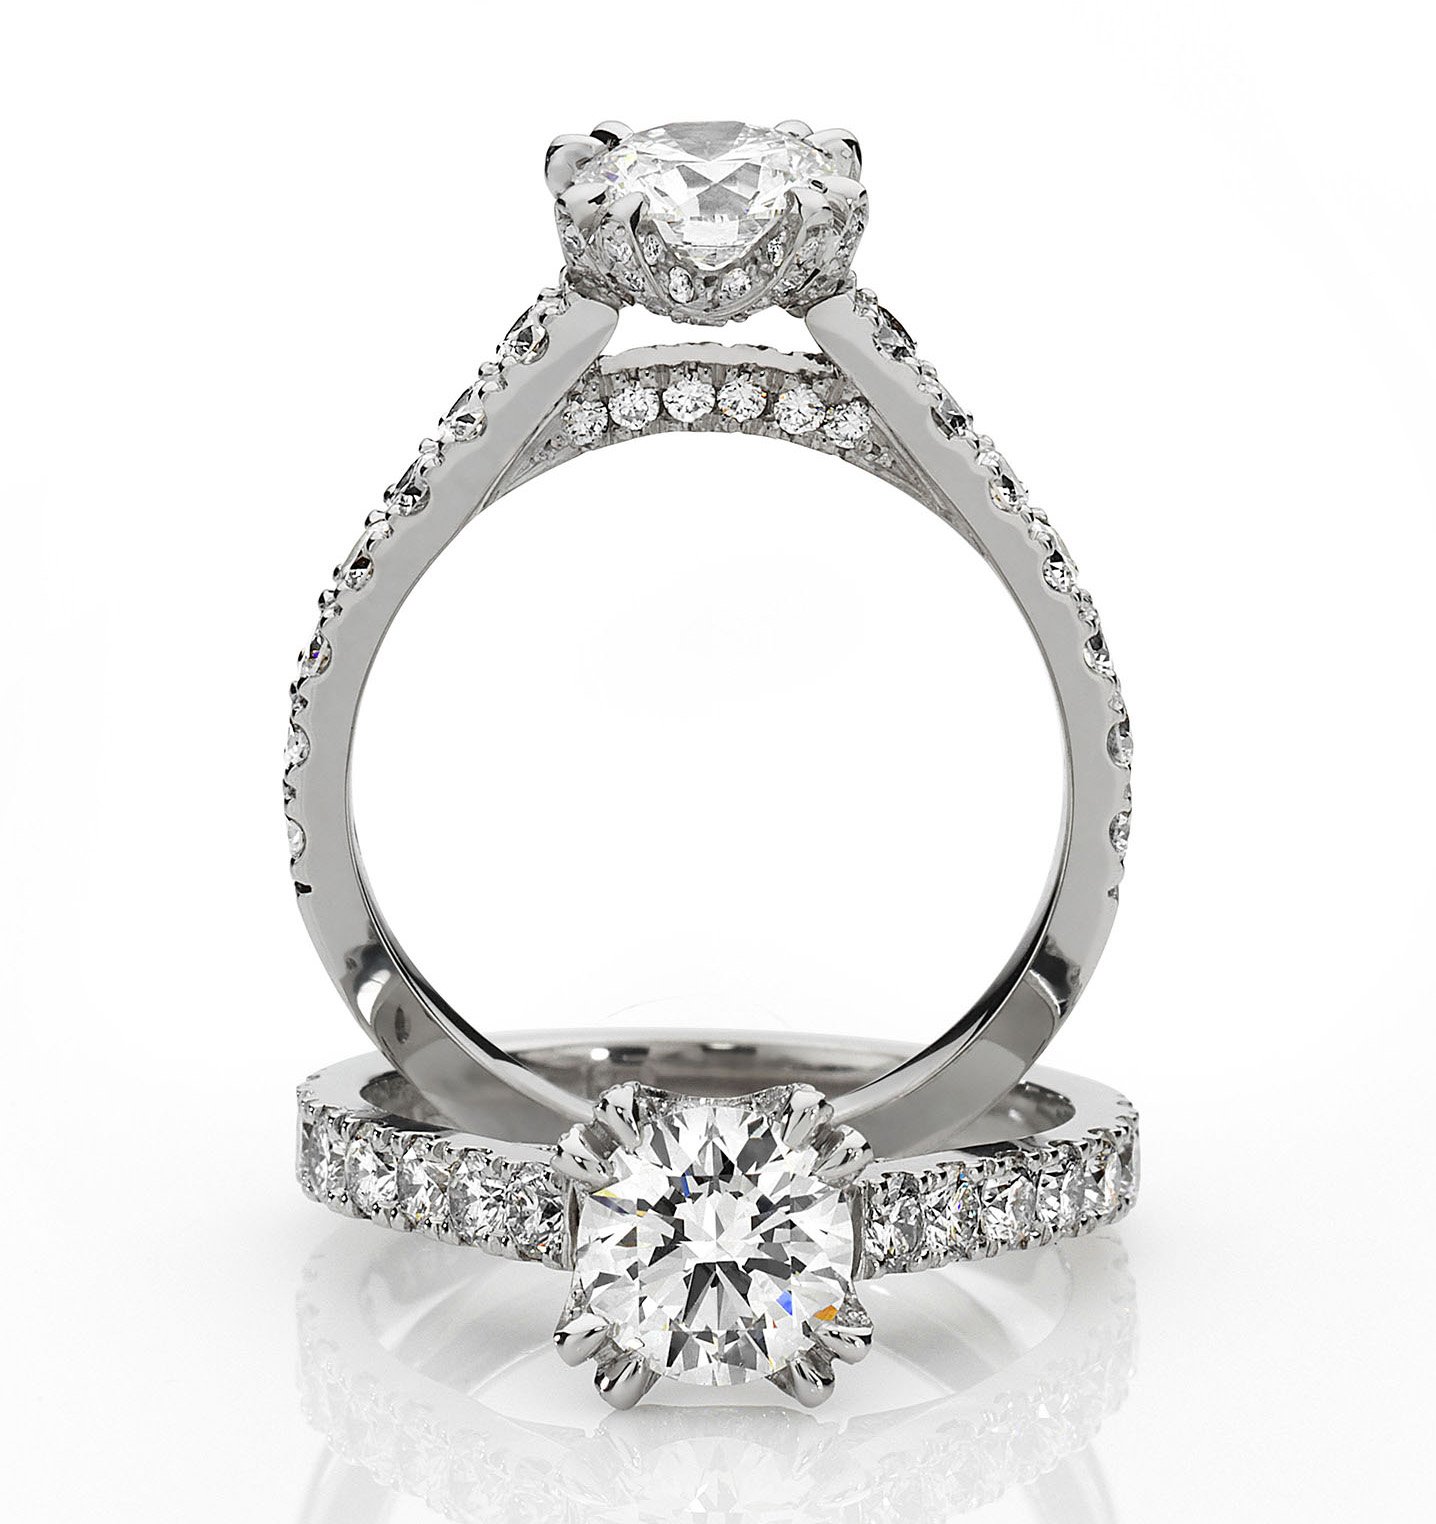 How much does a custom engagement ring cost?